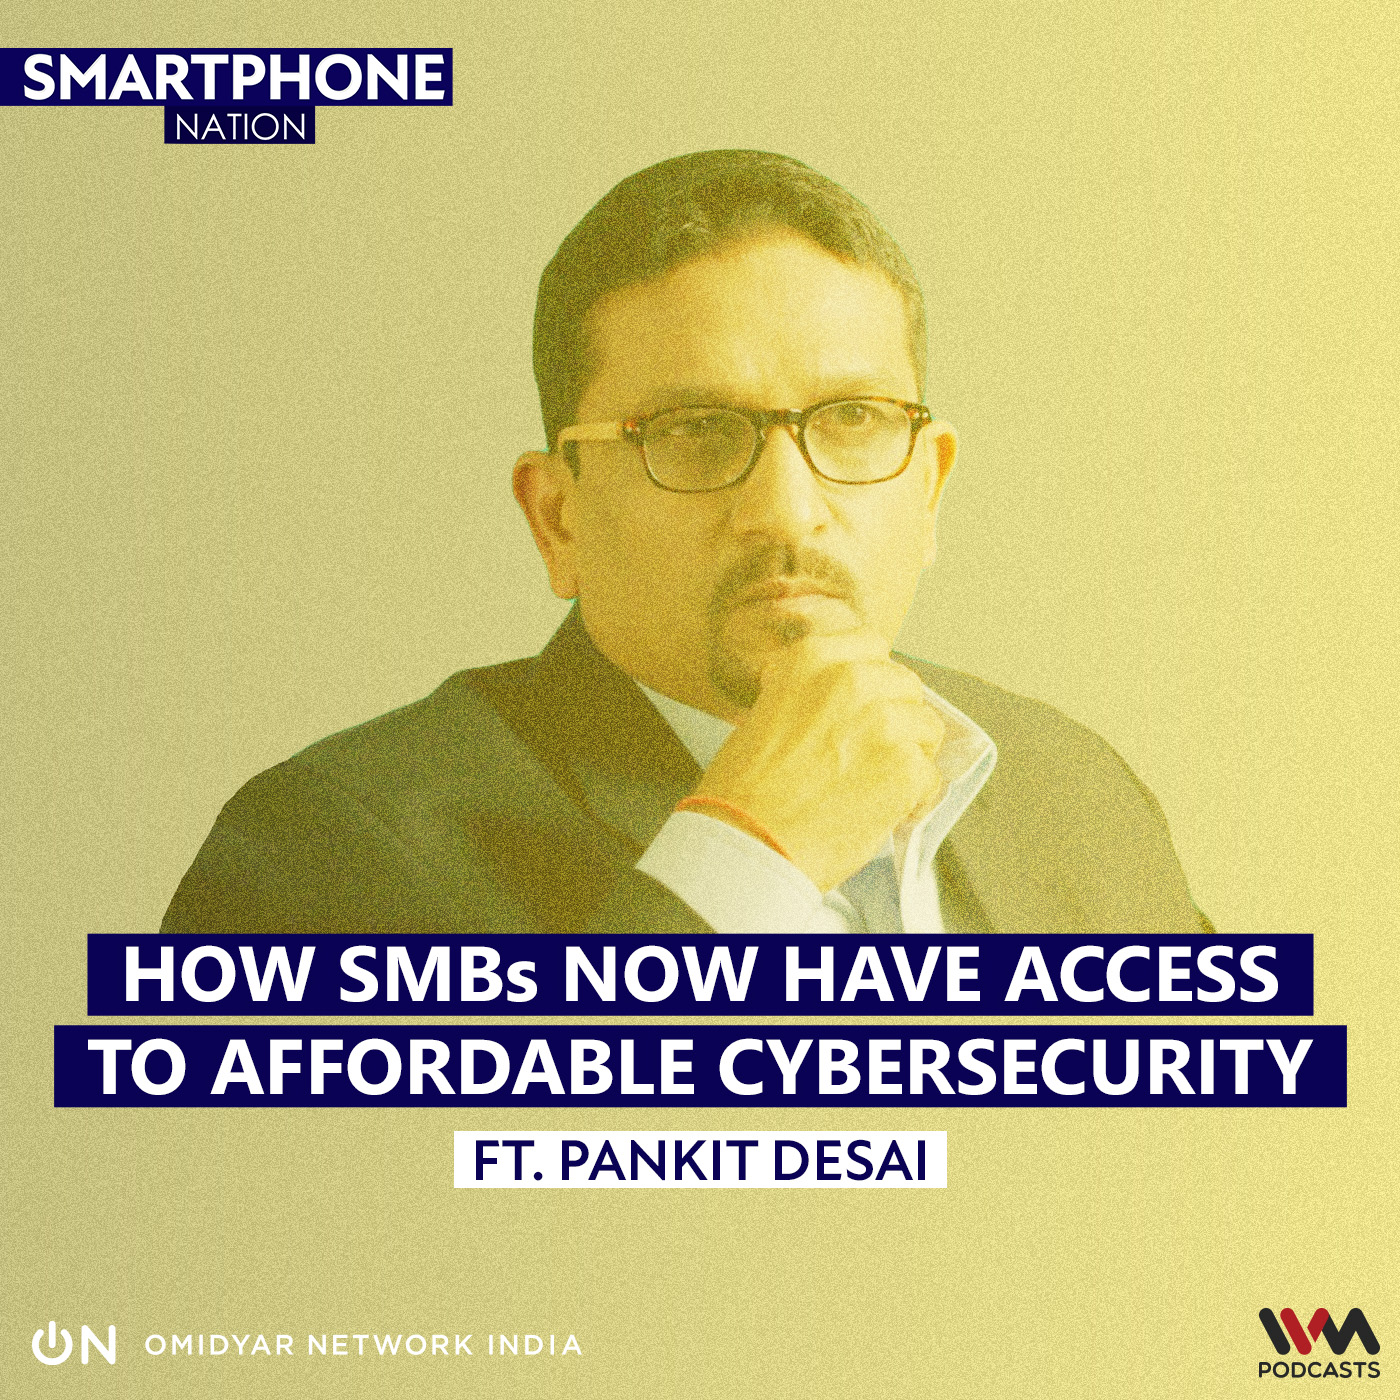 How SMBs now have access to Affordable Cybersecurity, ft. Pankit Desai